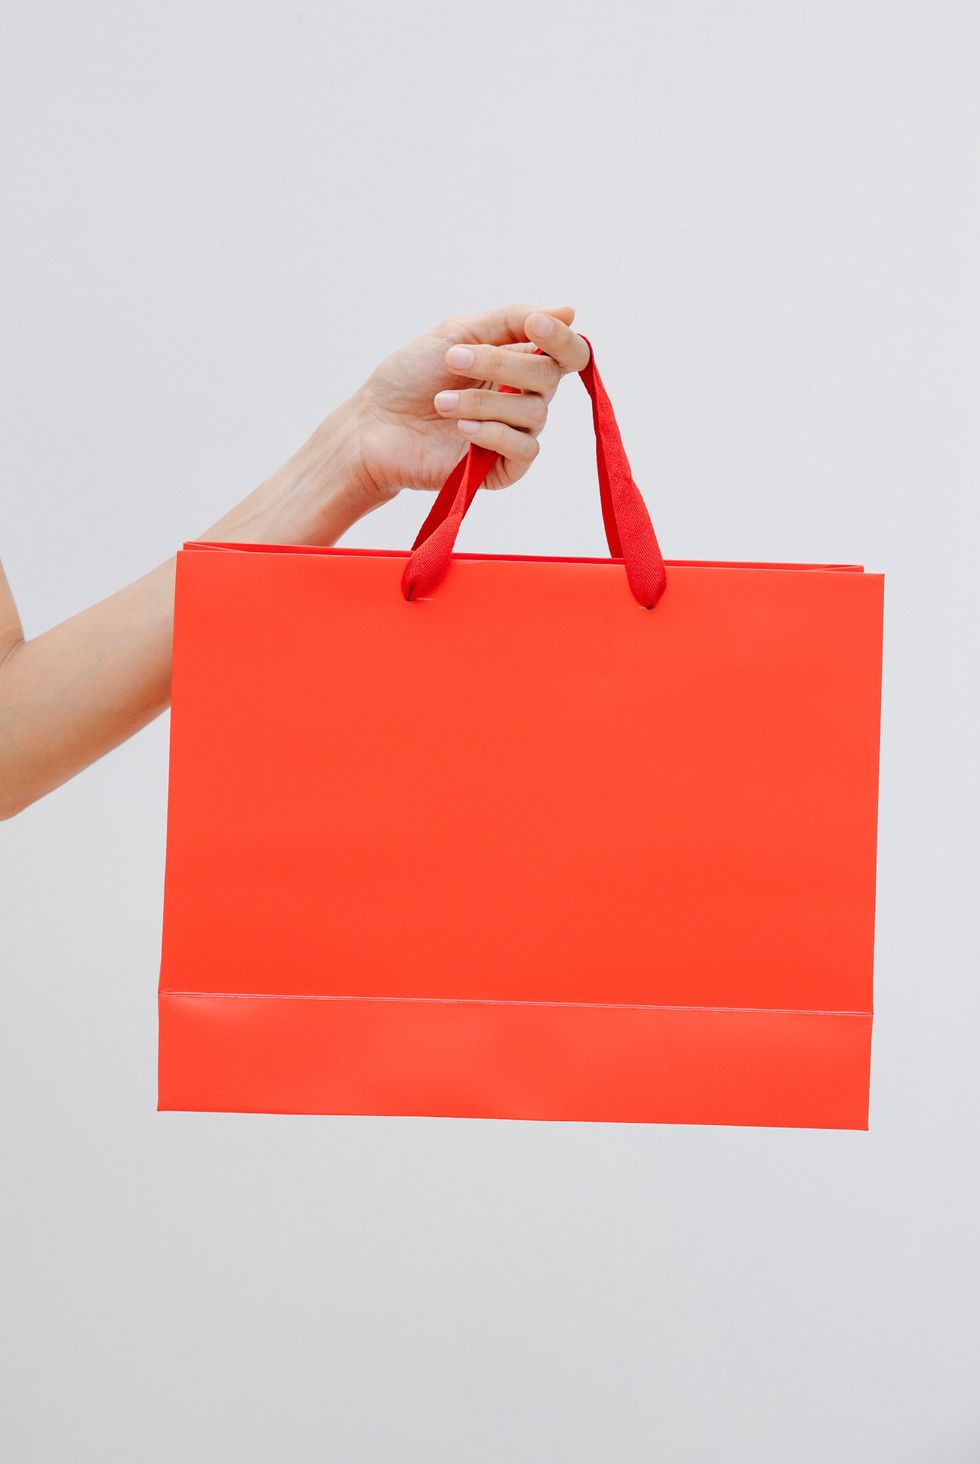 hand holding a red shopping bag